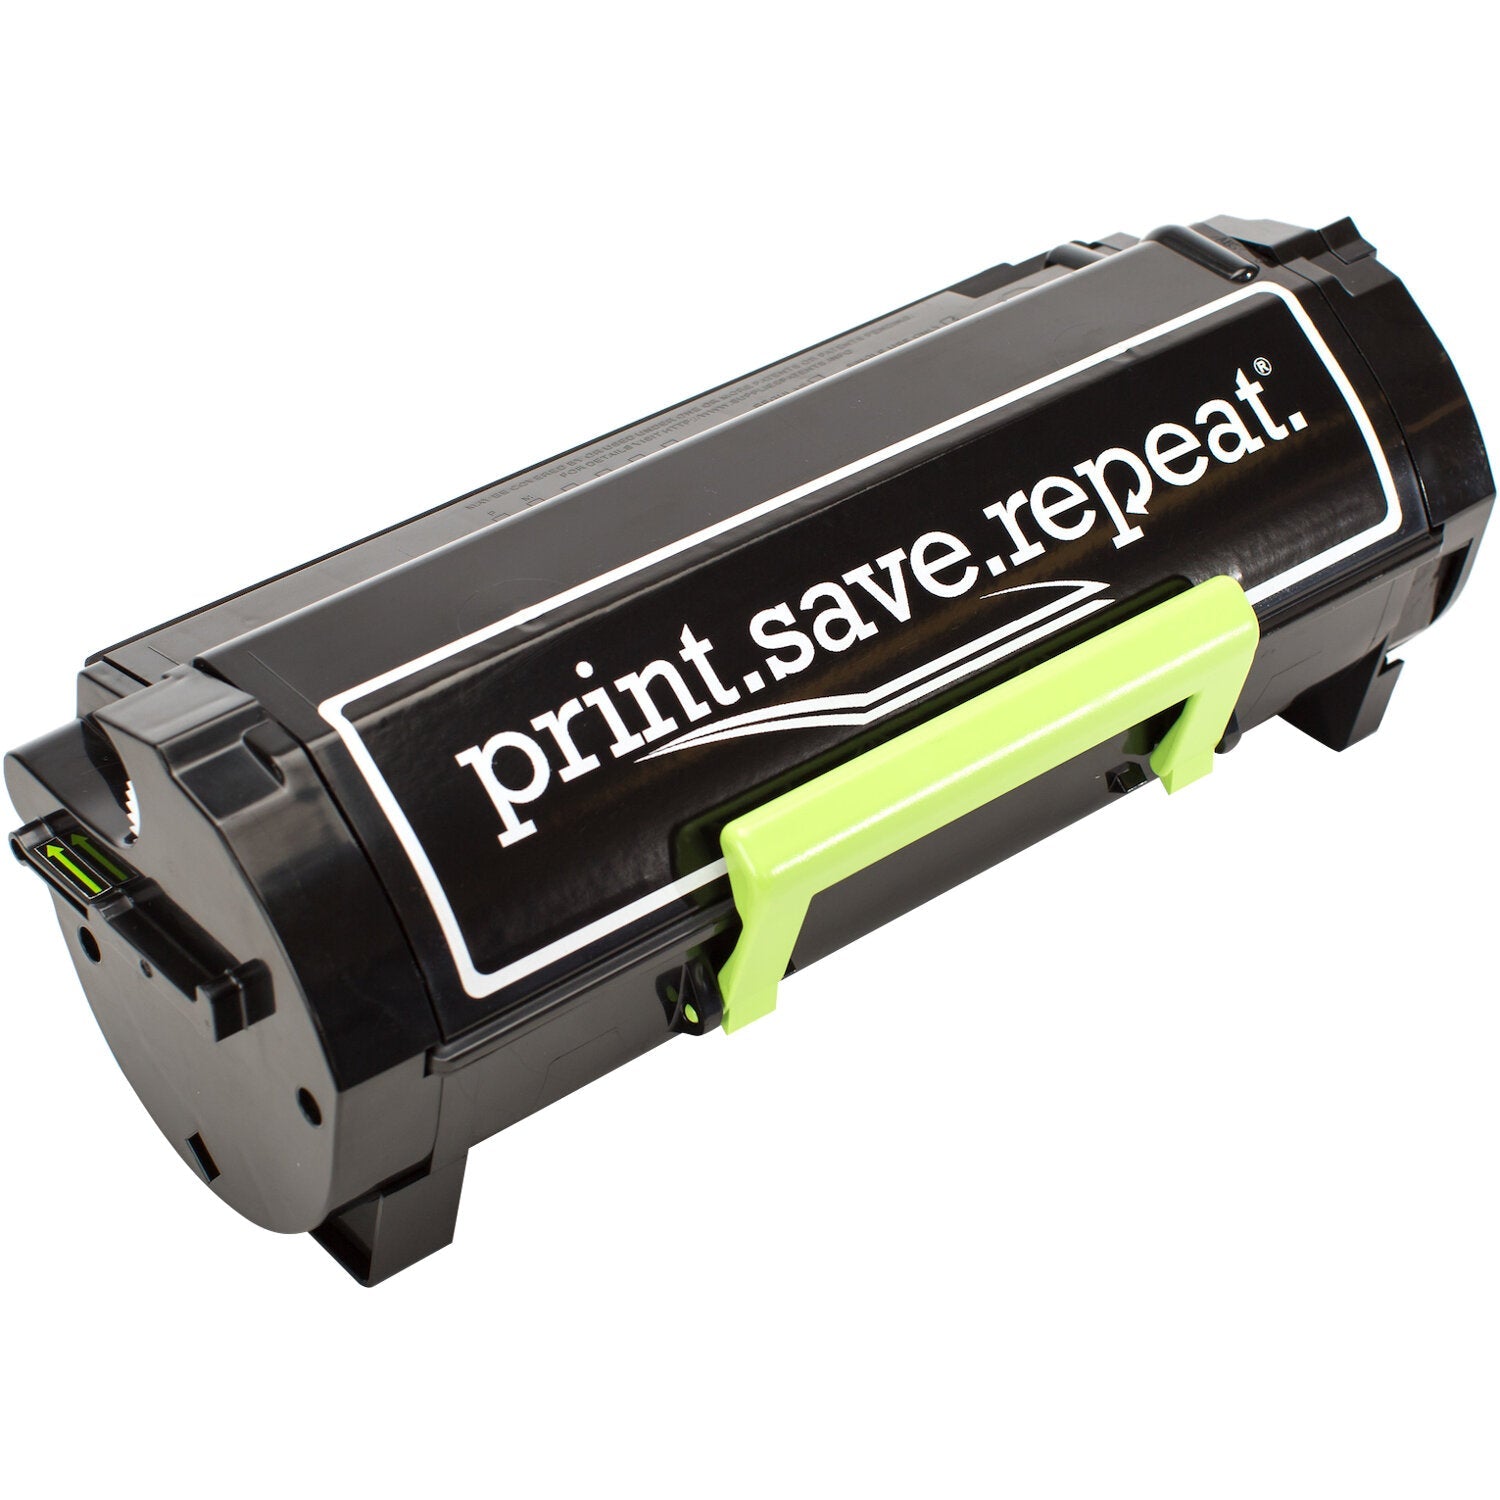 Print.Save.Repeat. Lexmark B260UA0 Ultra High Yield Remanufactured Toner Cartridge for B2650, MB2650 [15,000 Pages]